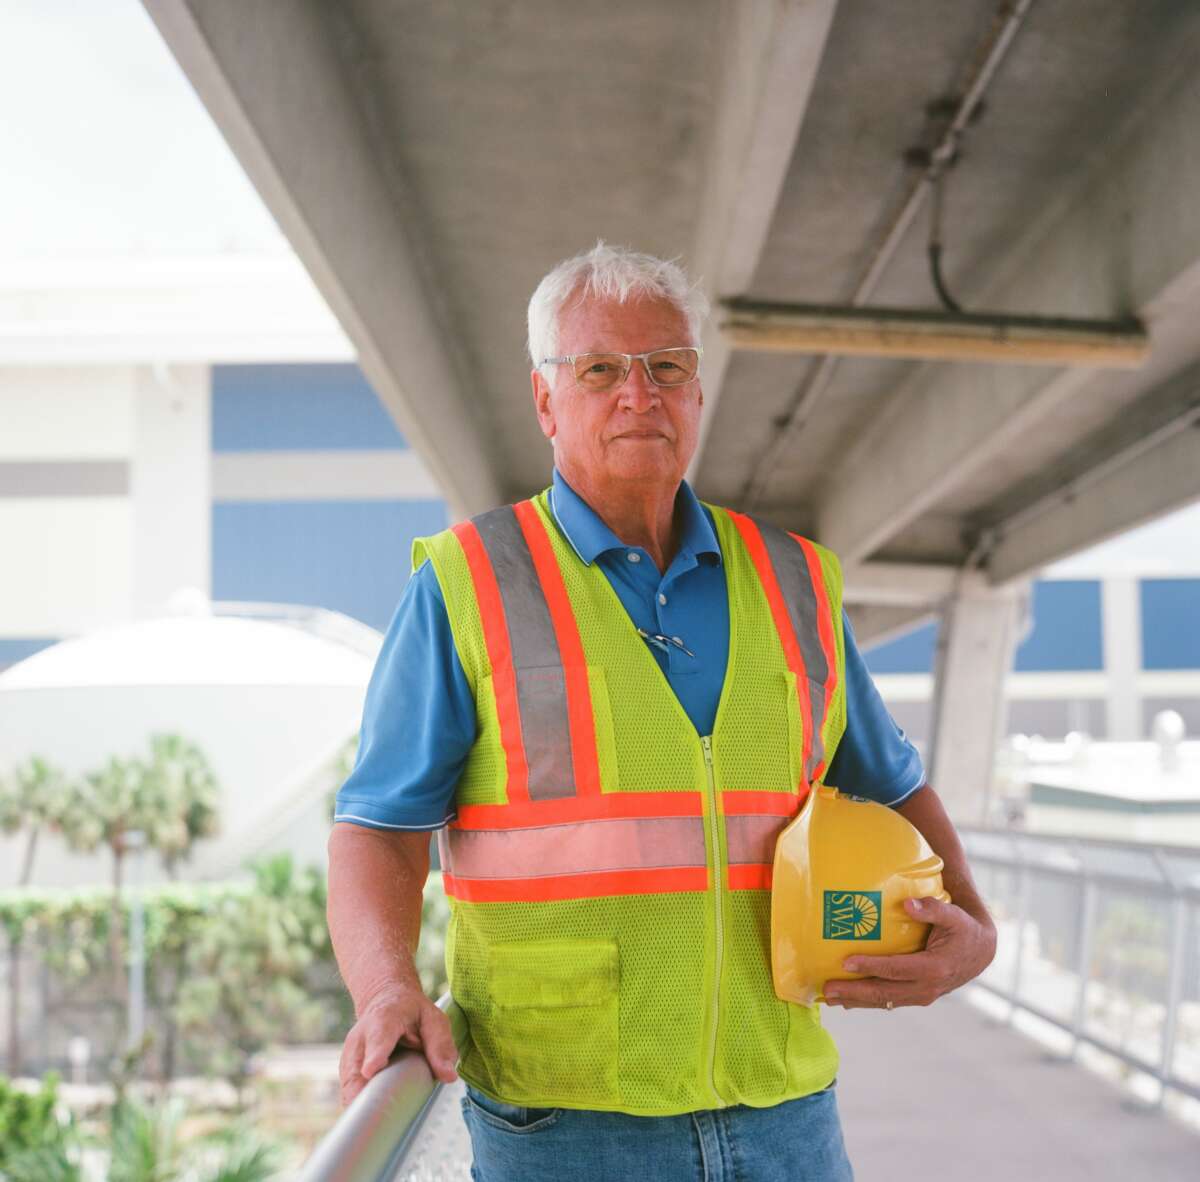 Ray Schauer is the director of facility operations at the Solid Waste Authority of Palm Beach County, Florida.